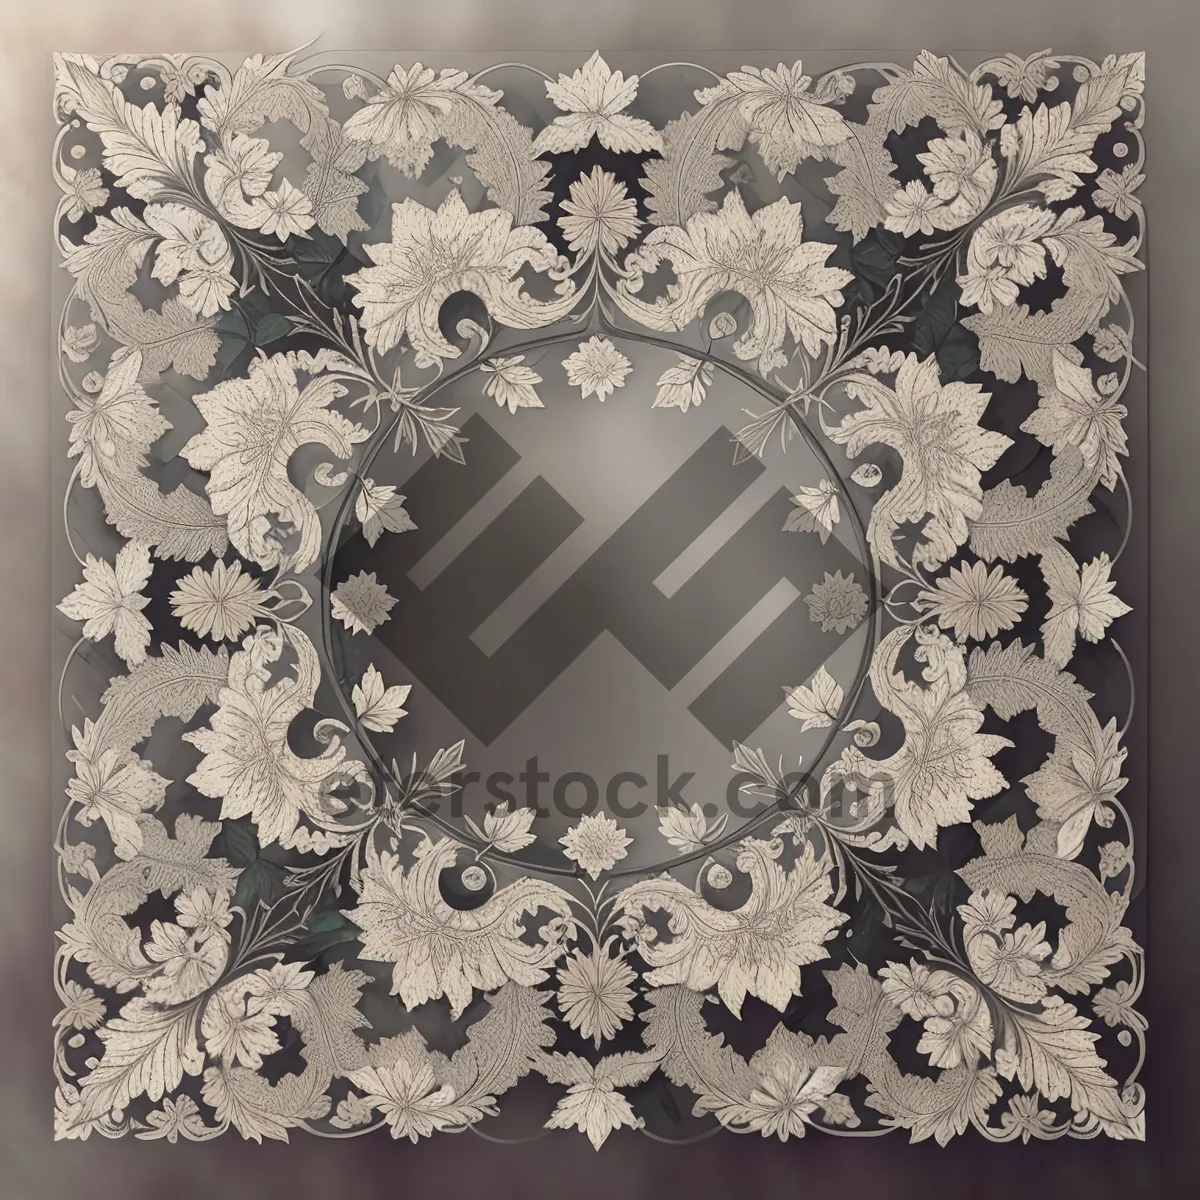 Picture of Lace-Inspired Vintage Floral Frame Decoration